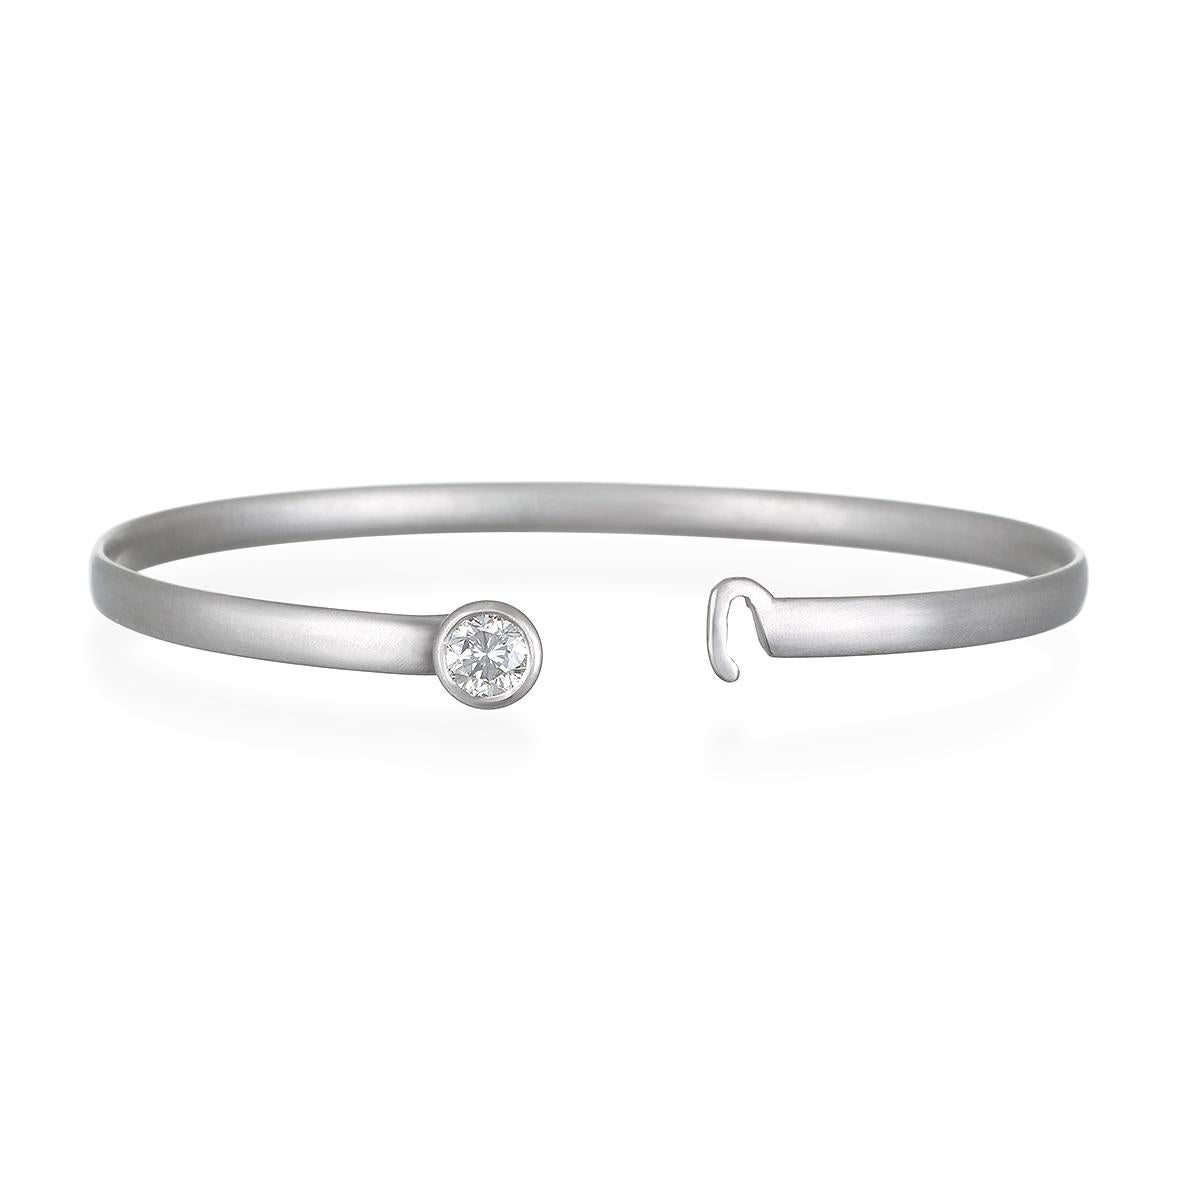 Faye Kim has set this round brilliant cut solitaire diamond into a classic platinum button bangle bracelet, perfect for wearing alone or stacking with other bangles. Ideal for any occasion, from work to wedding.

G Color, VS Clarity .71